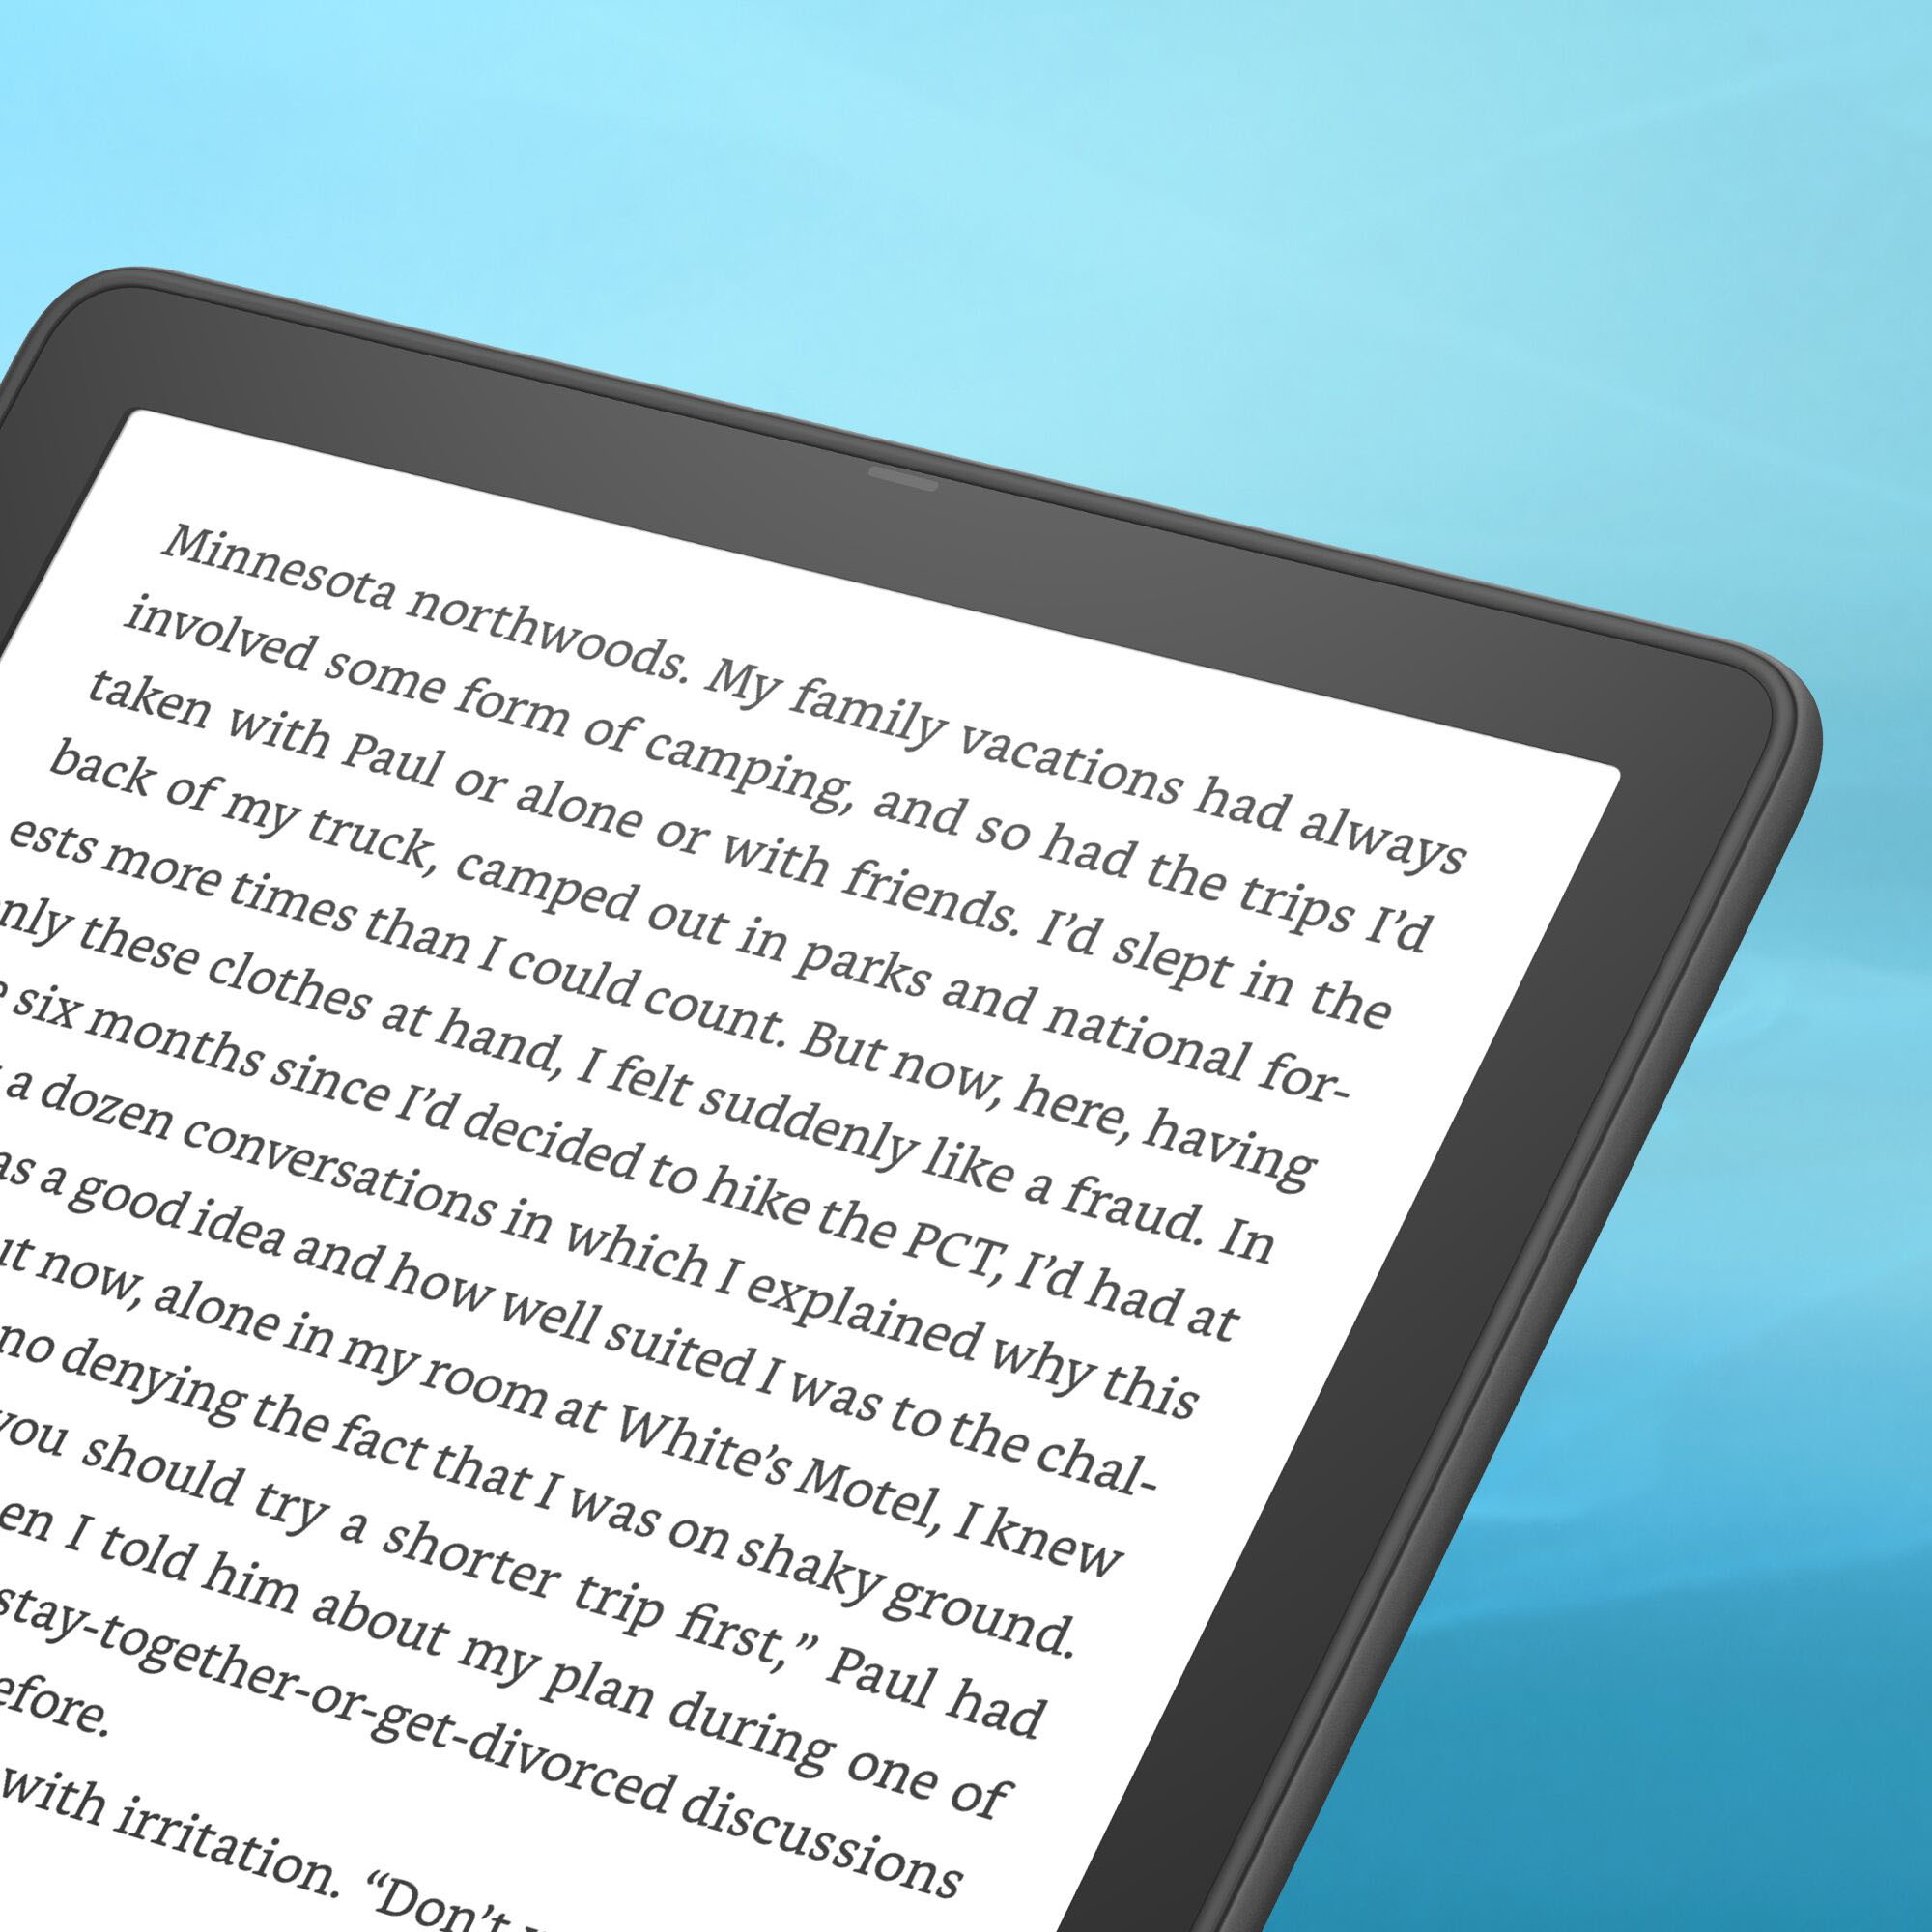 Amazon.com: Kindle Paperwhite Signature Edition (32 GB) – With a 